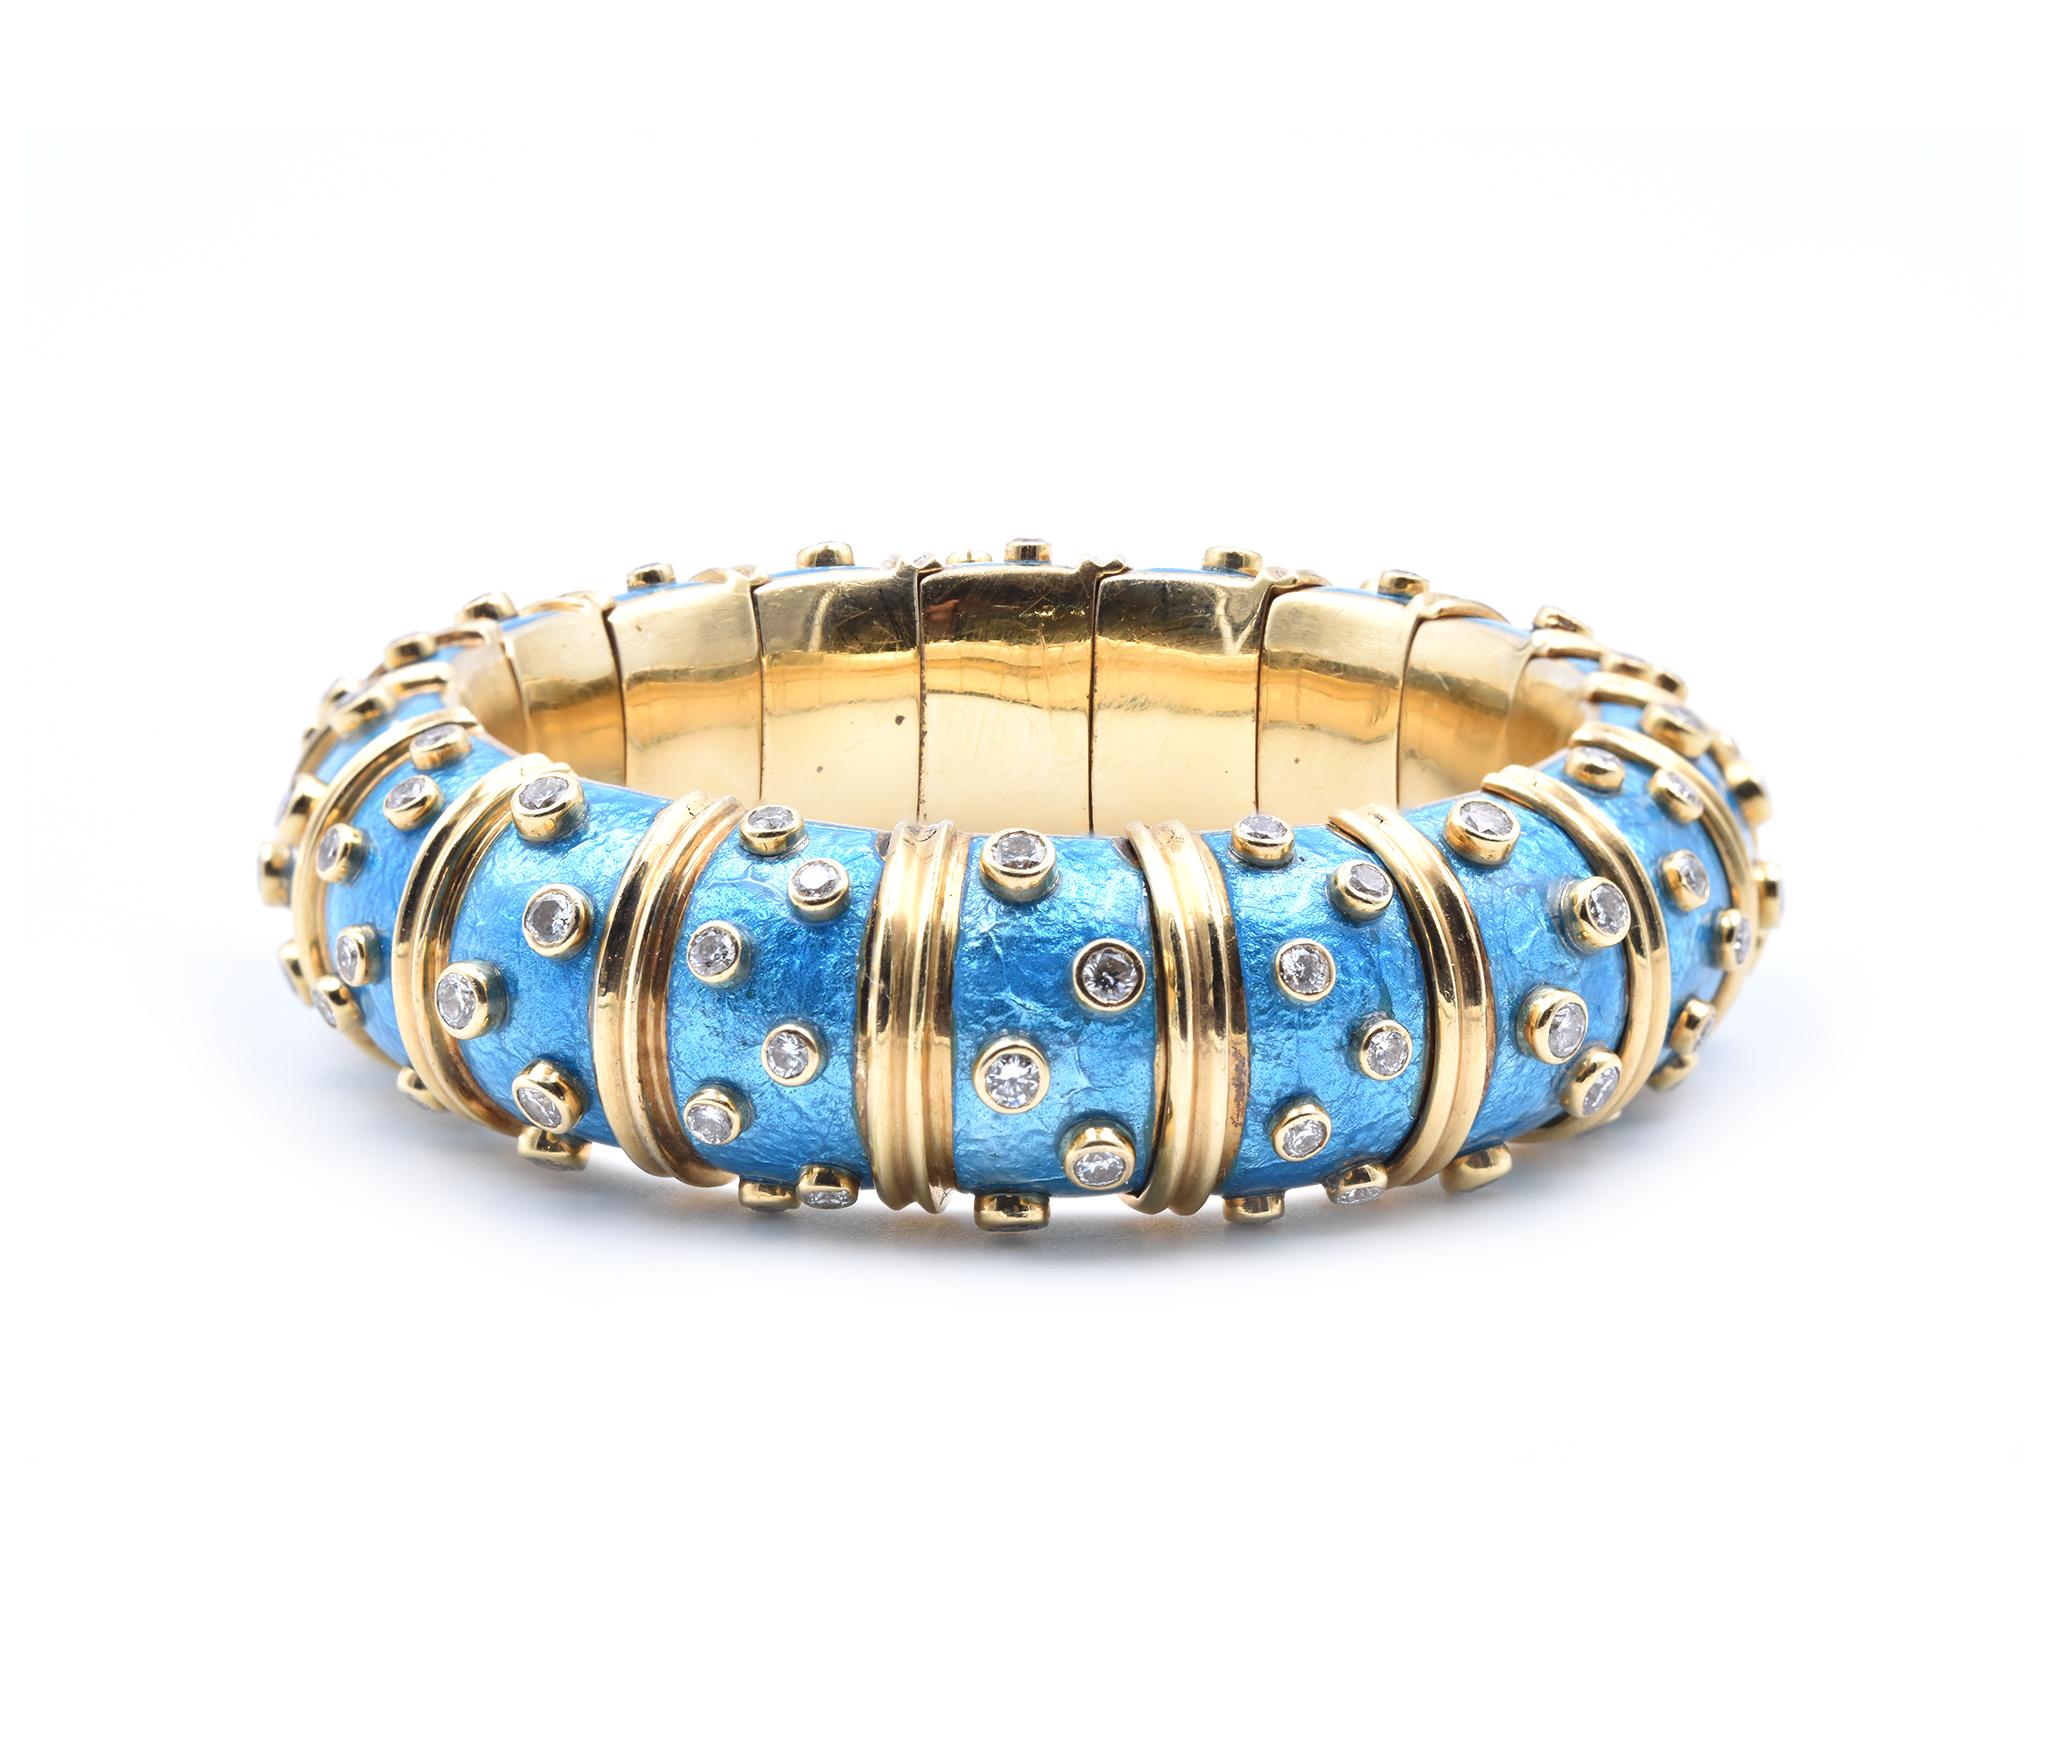 Designer: Tiffany & Co.
Material: 18k yellow gold and blue Paillonne enamel
Diamonds: 108 round brilliant cuts = 5.20cttw 
Color: G
Clarity: VS
Dimensions: bracelet measures 18.50mm in width, will fit a 7-inch wrist
Weight: 126.8 grams
646-639